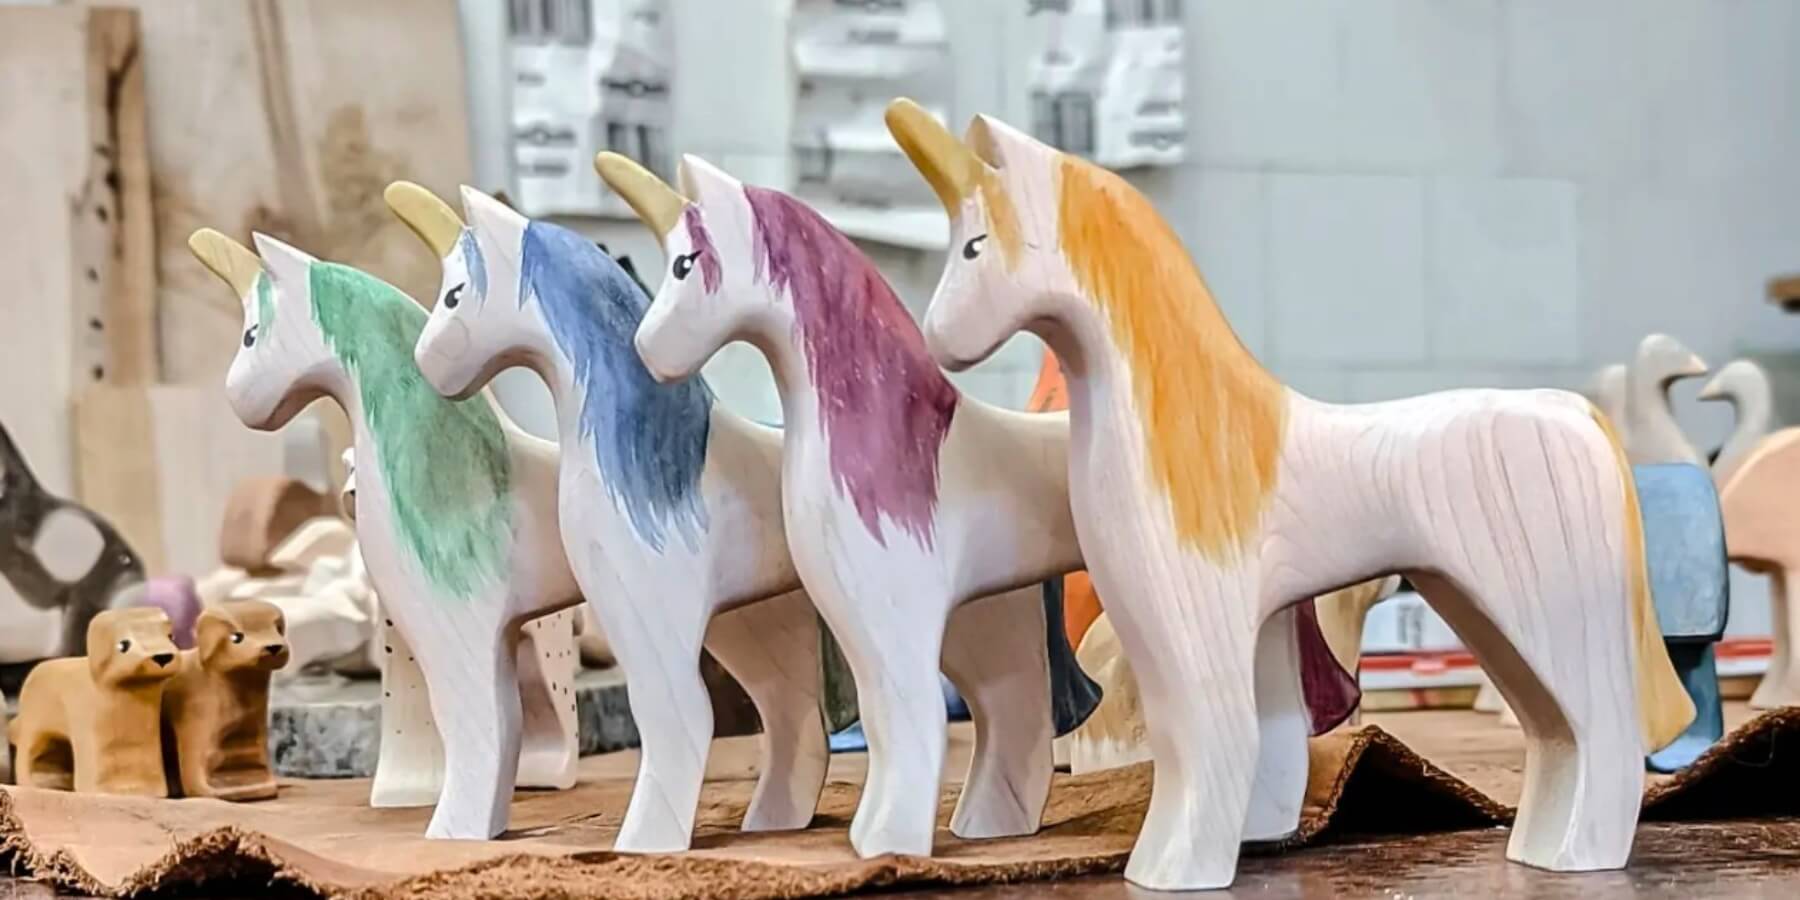 NOM Handcrafted Rainbow Unicorn Wooden Toy Figures for small world imaginative play